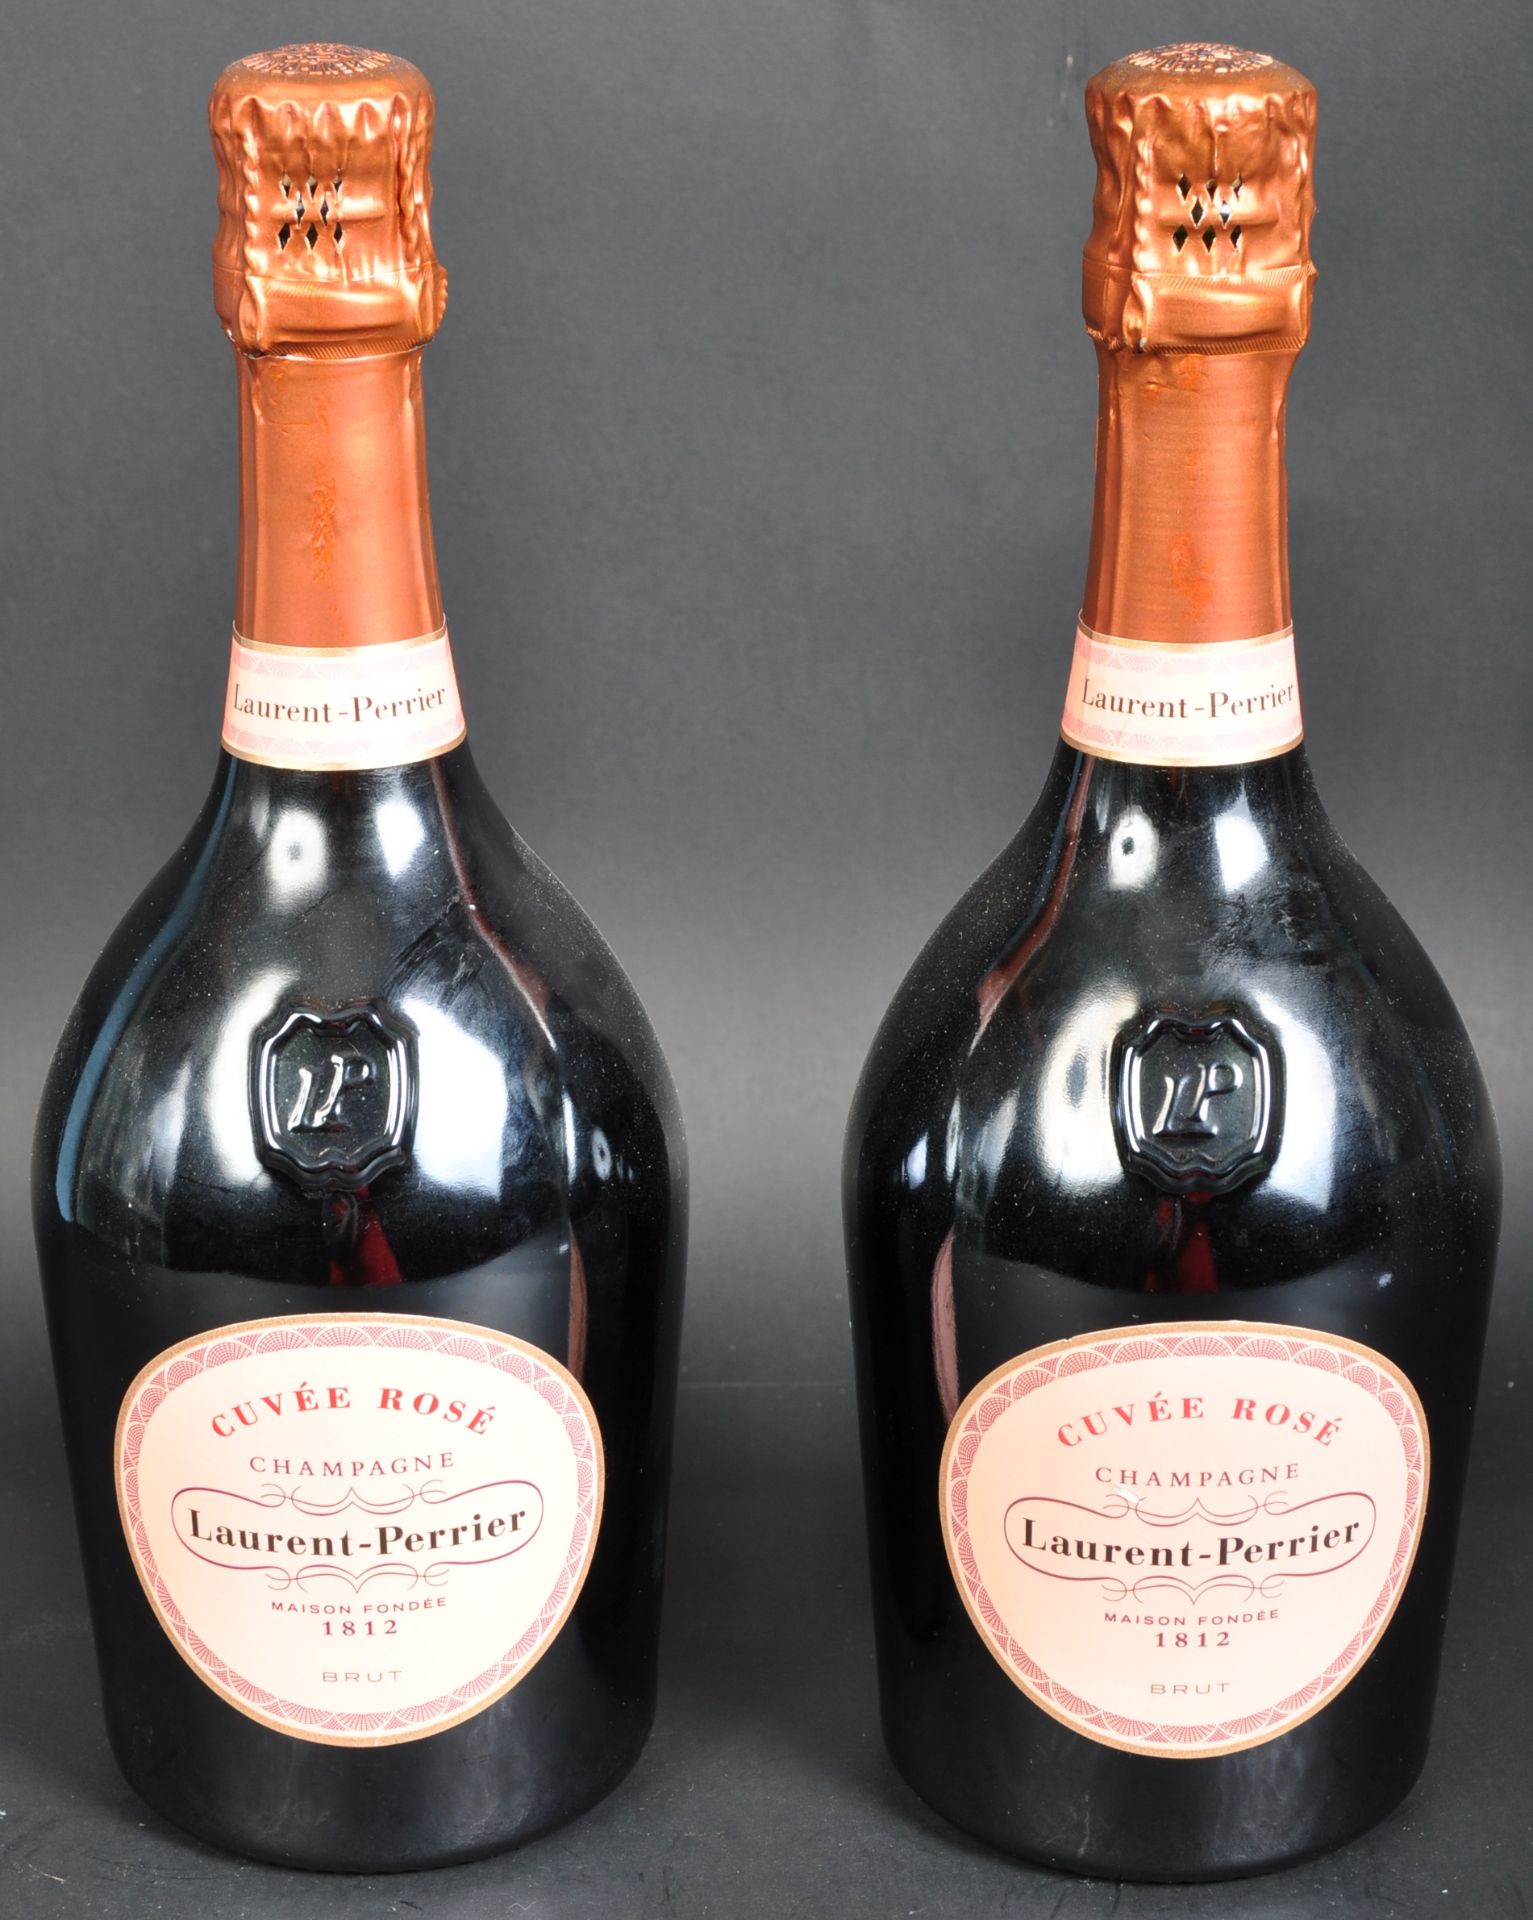 TWO BOTTLES OF 750ML LAURENT-PERRIER CUVEE ROSE CHAMPAGNE - Image 2 of 4